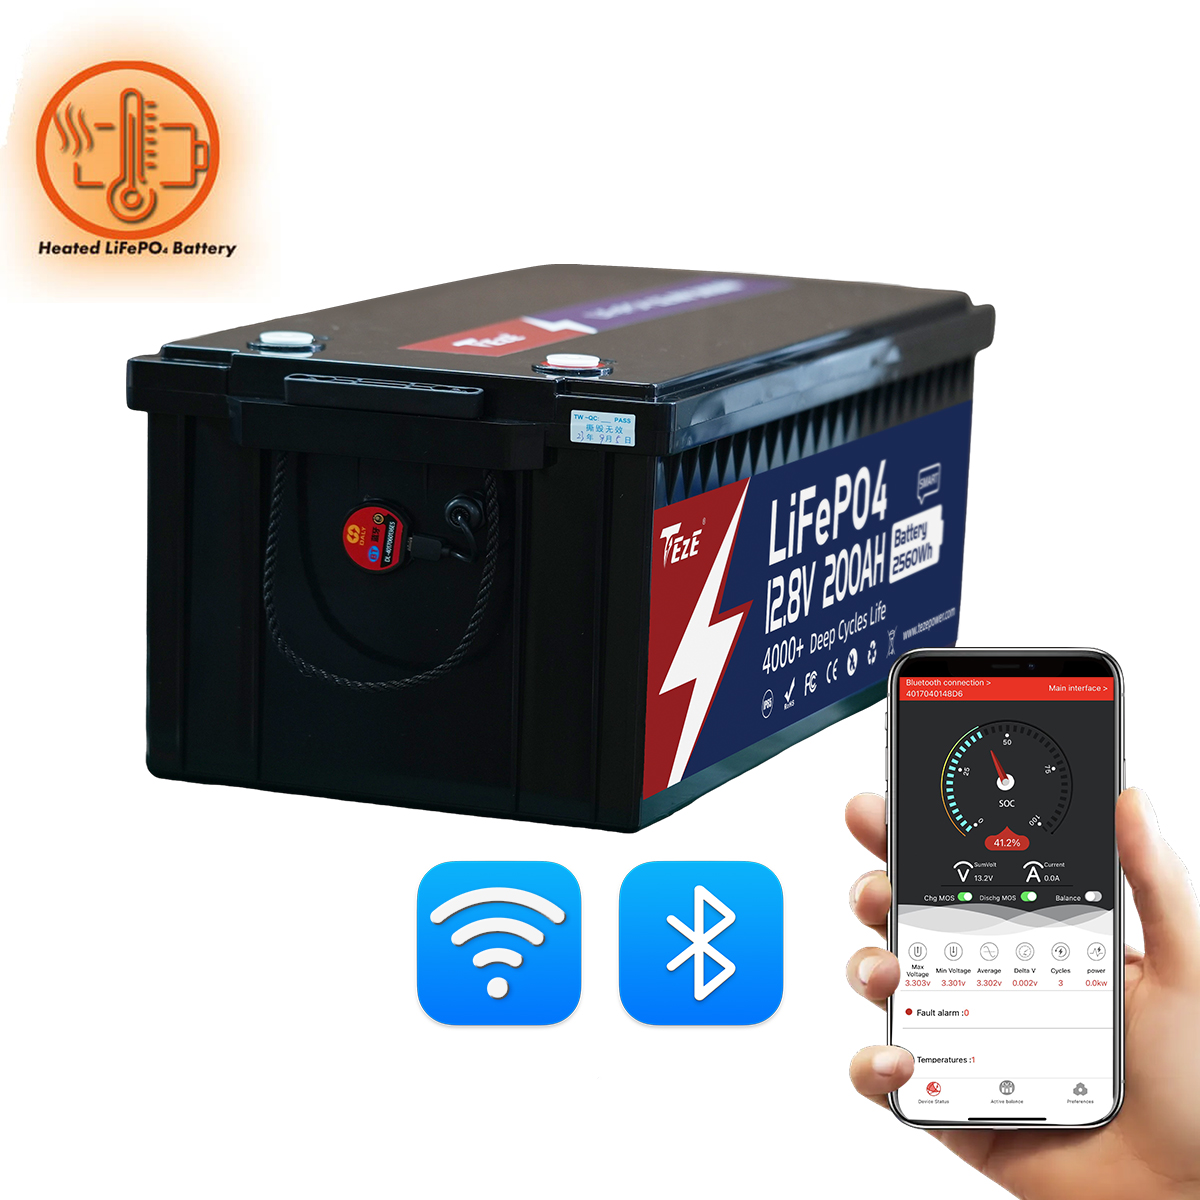 TezePower 12V 200Ah LiFePO4 Battery with RS485/RS232/CAN Communication Ports, WiFi and Bluetooth, Self-heating and Active Balancer, Built-in 200A Daly BMS(WiFi External Version)-TezePower